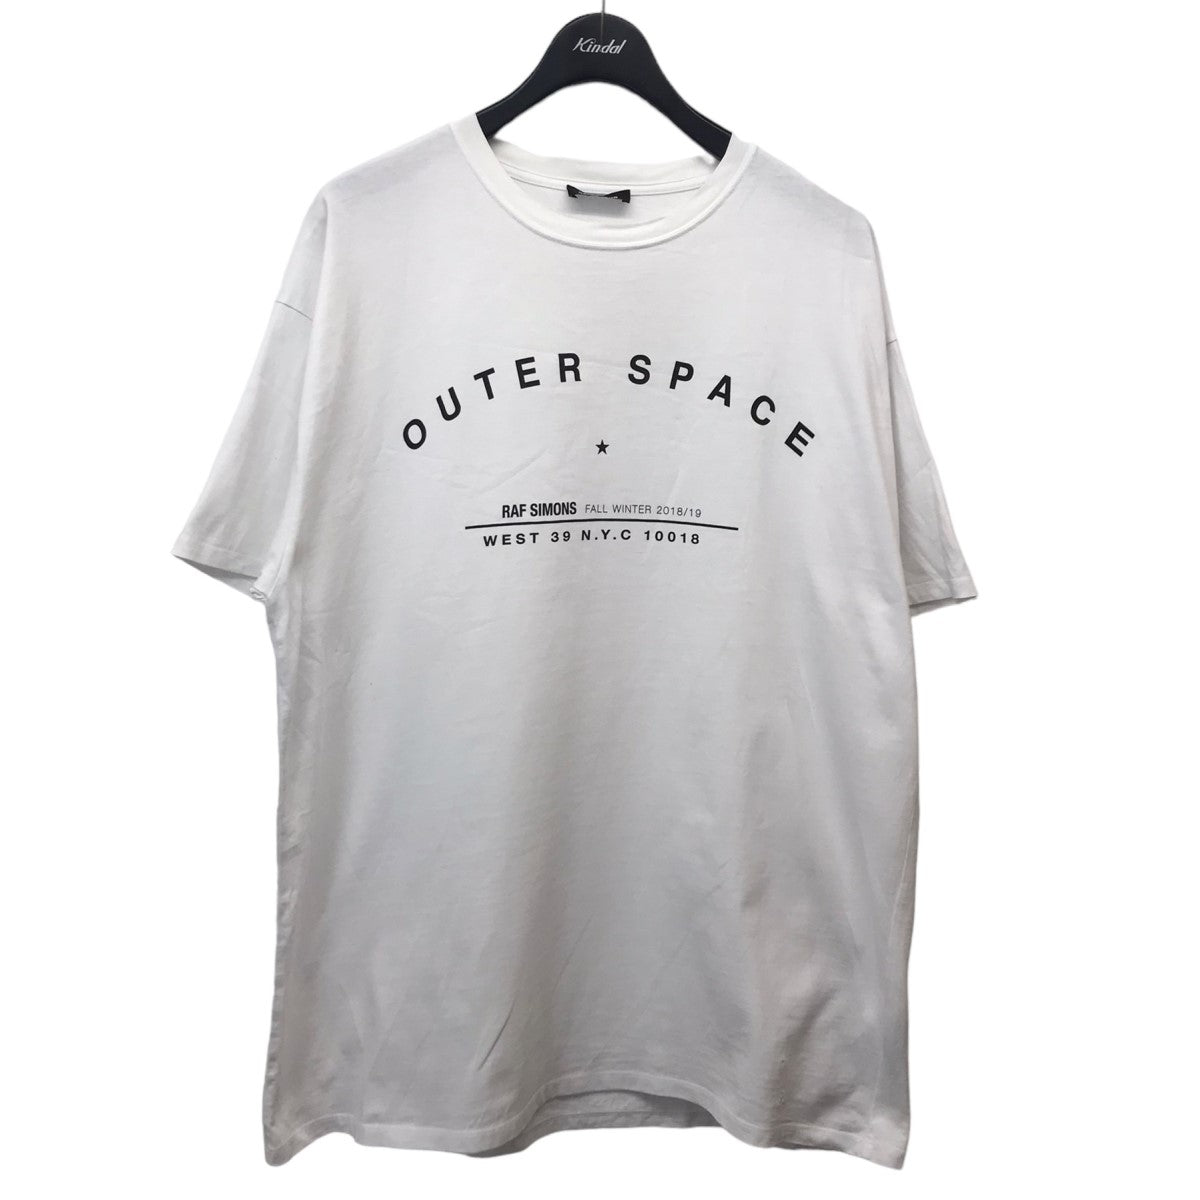 RAF SIMONS(ラフシモンズ) 18AWOUTER SPACEプリントTシャツ19000-00010 